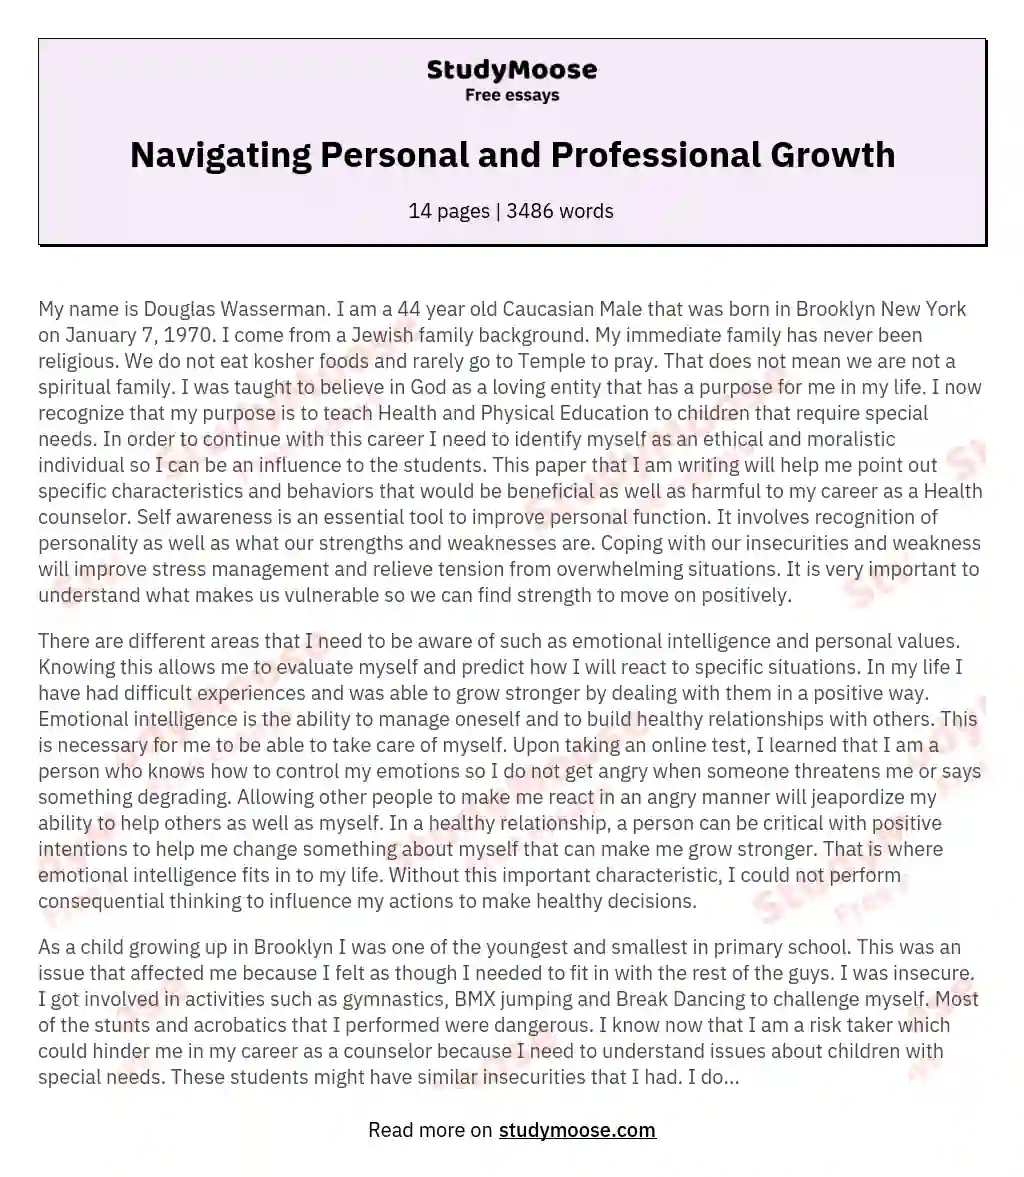 Navigating Personal and Professional Growth essay